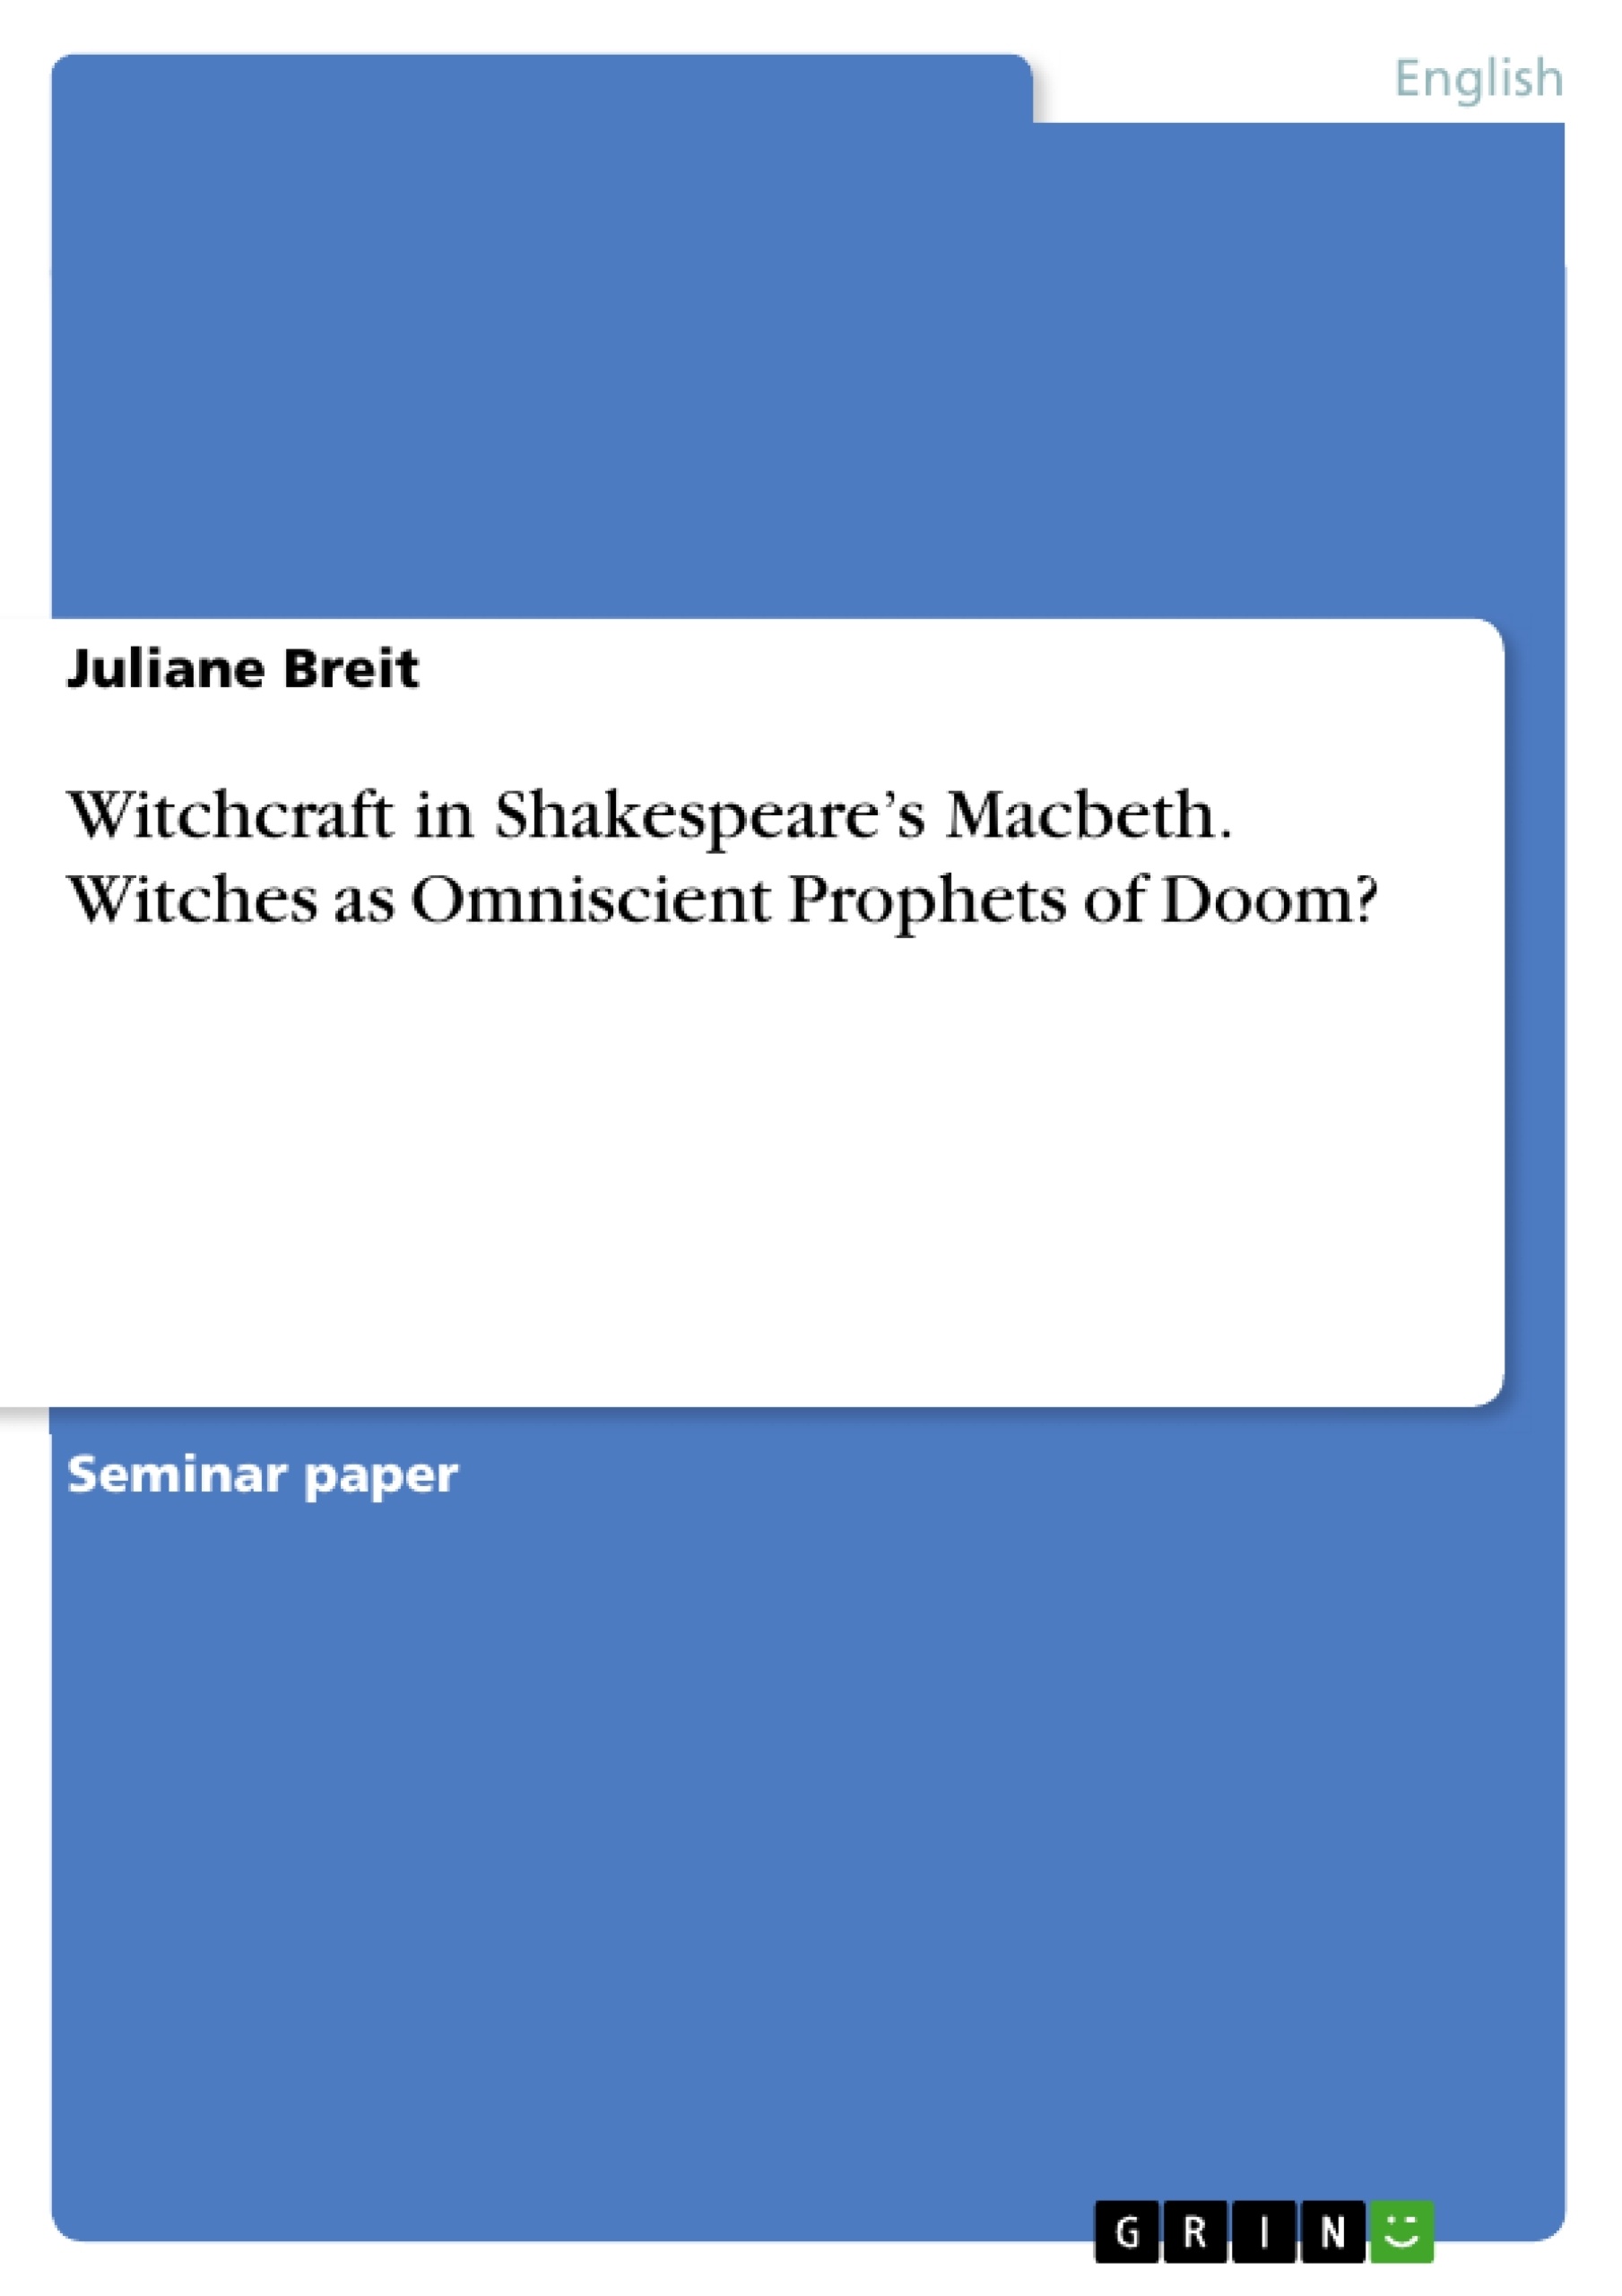 Title: Witchcraft in Shakespeare’s Macbeth. Witches as Omniscient Prophets of Doom?